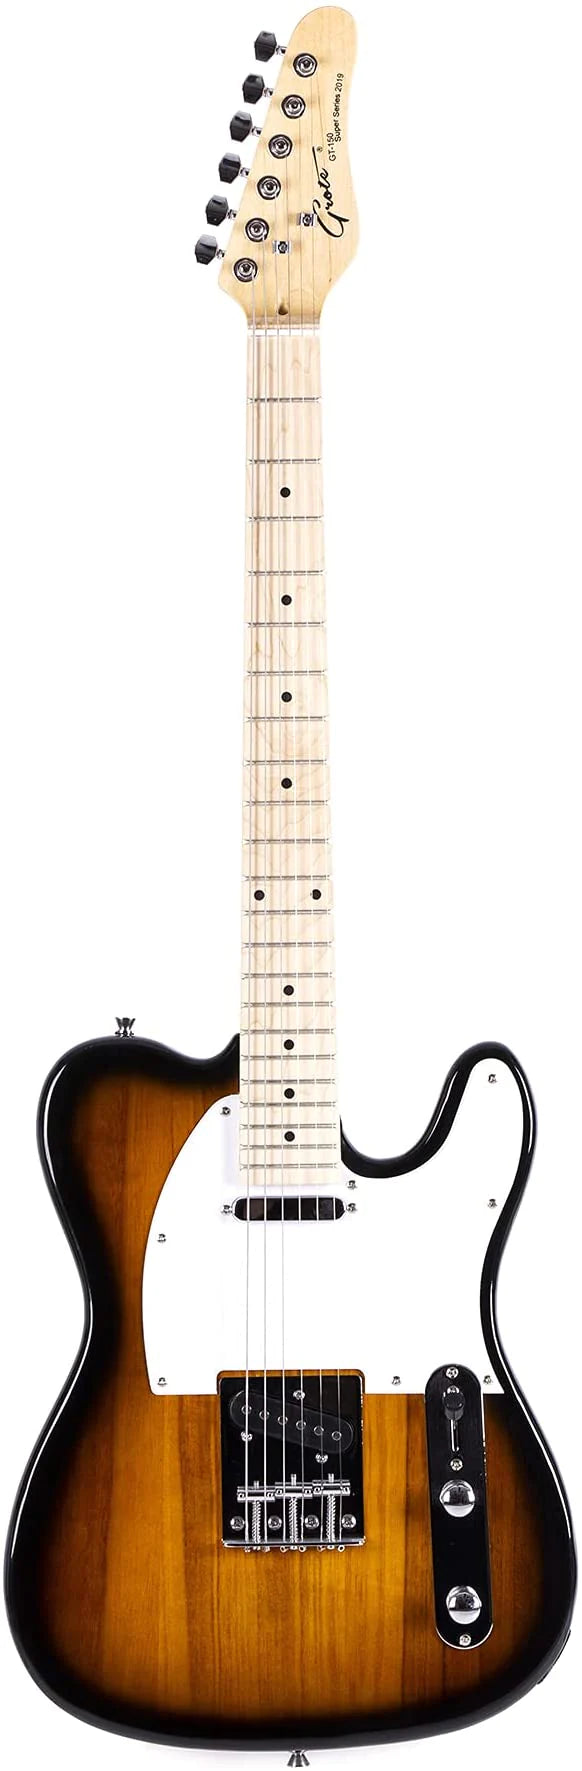 GROTE ELECTRIC GUITAR SOLID BODY TELE STYLE GUITAR FULL-SIZE BASSWOOD BODY WITH CANADIA MAPLE NECK CHROME HARDWARE PICKS - 3TS